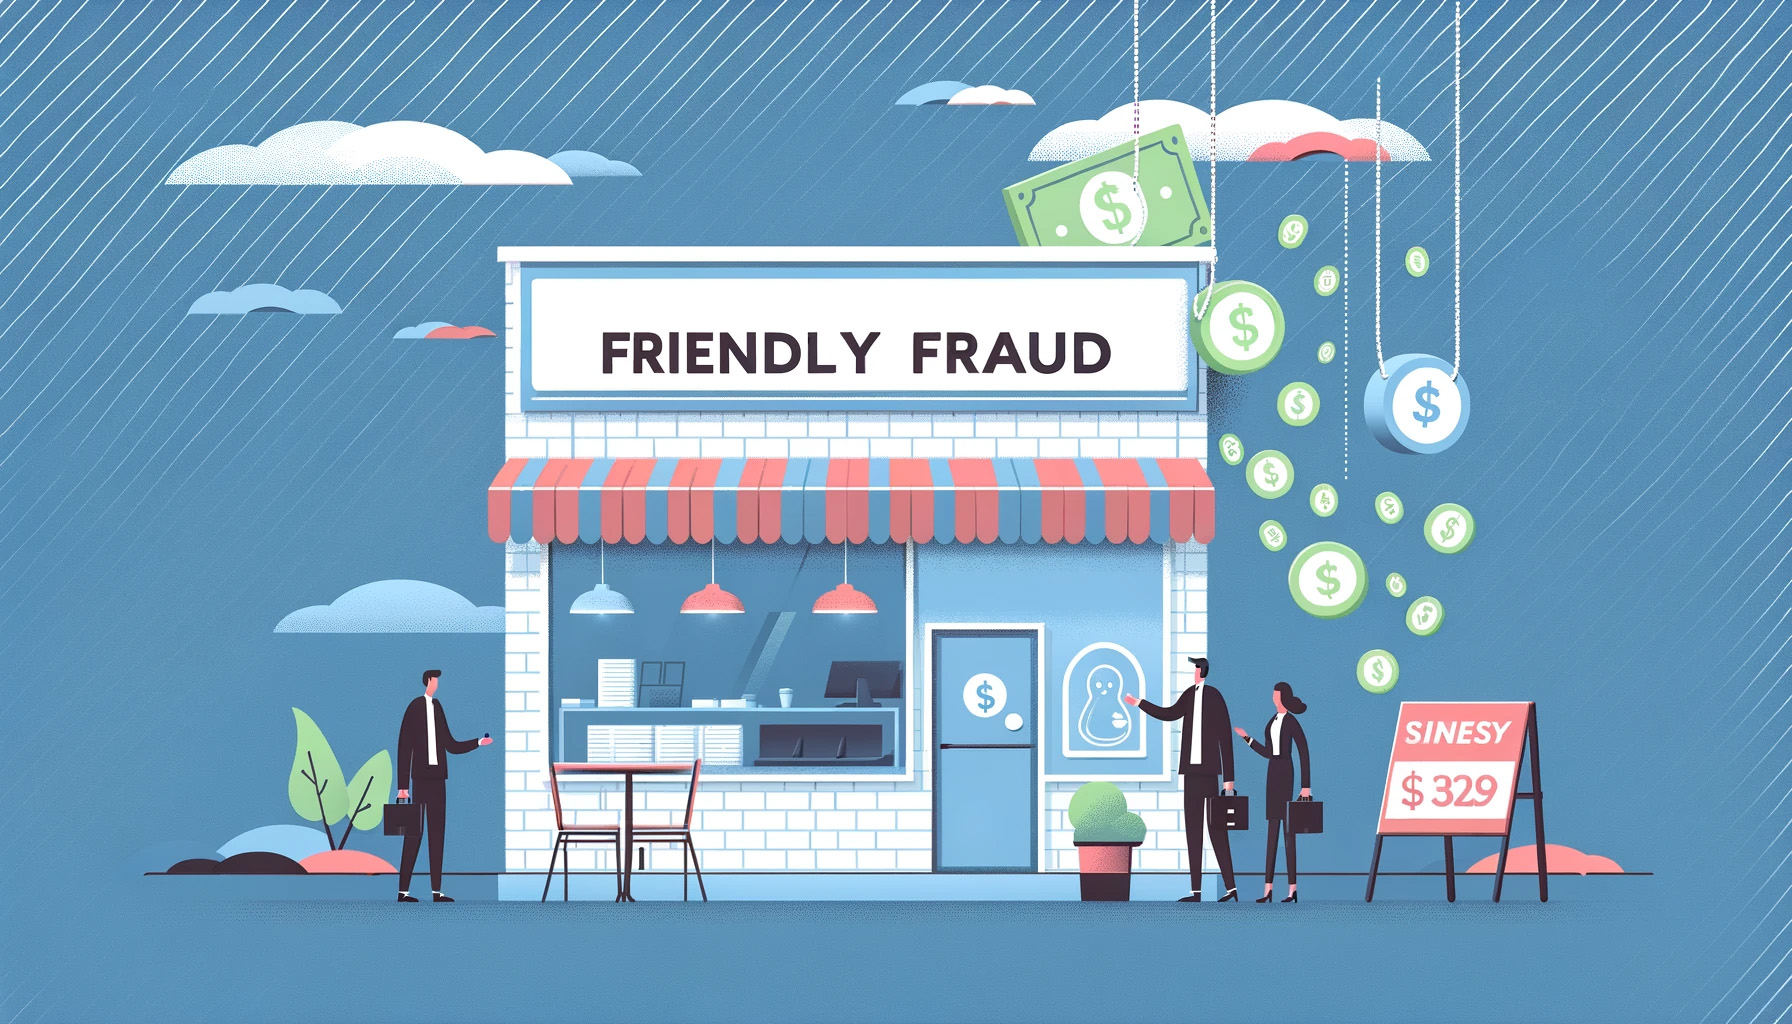 storefront with "FRIENDLY FRAUD" written above